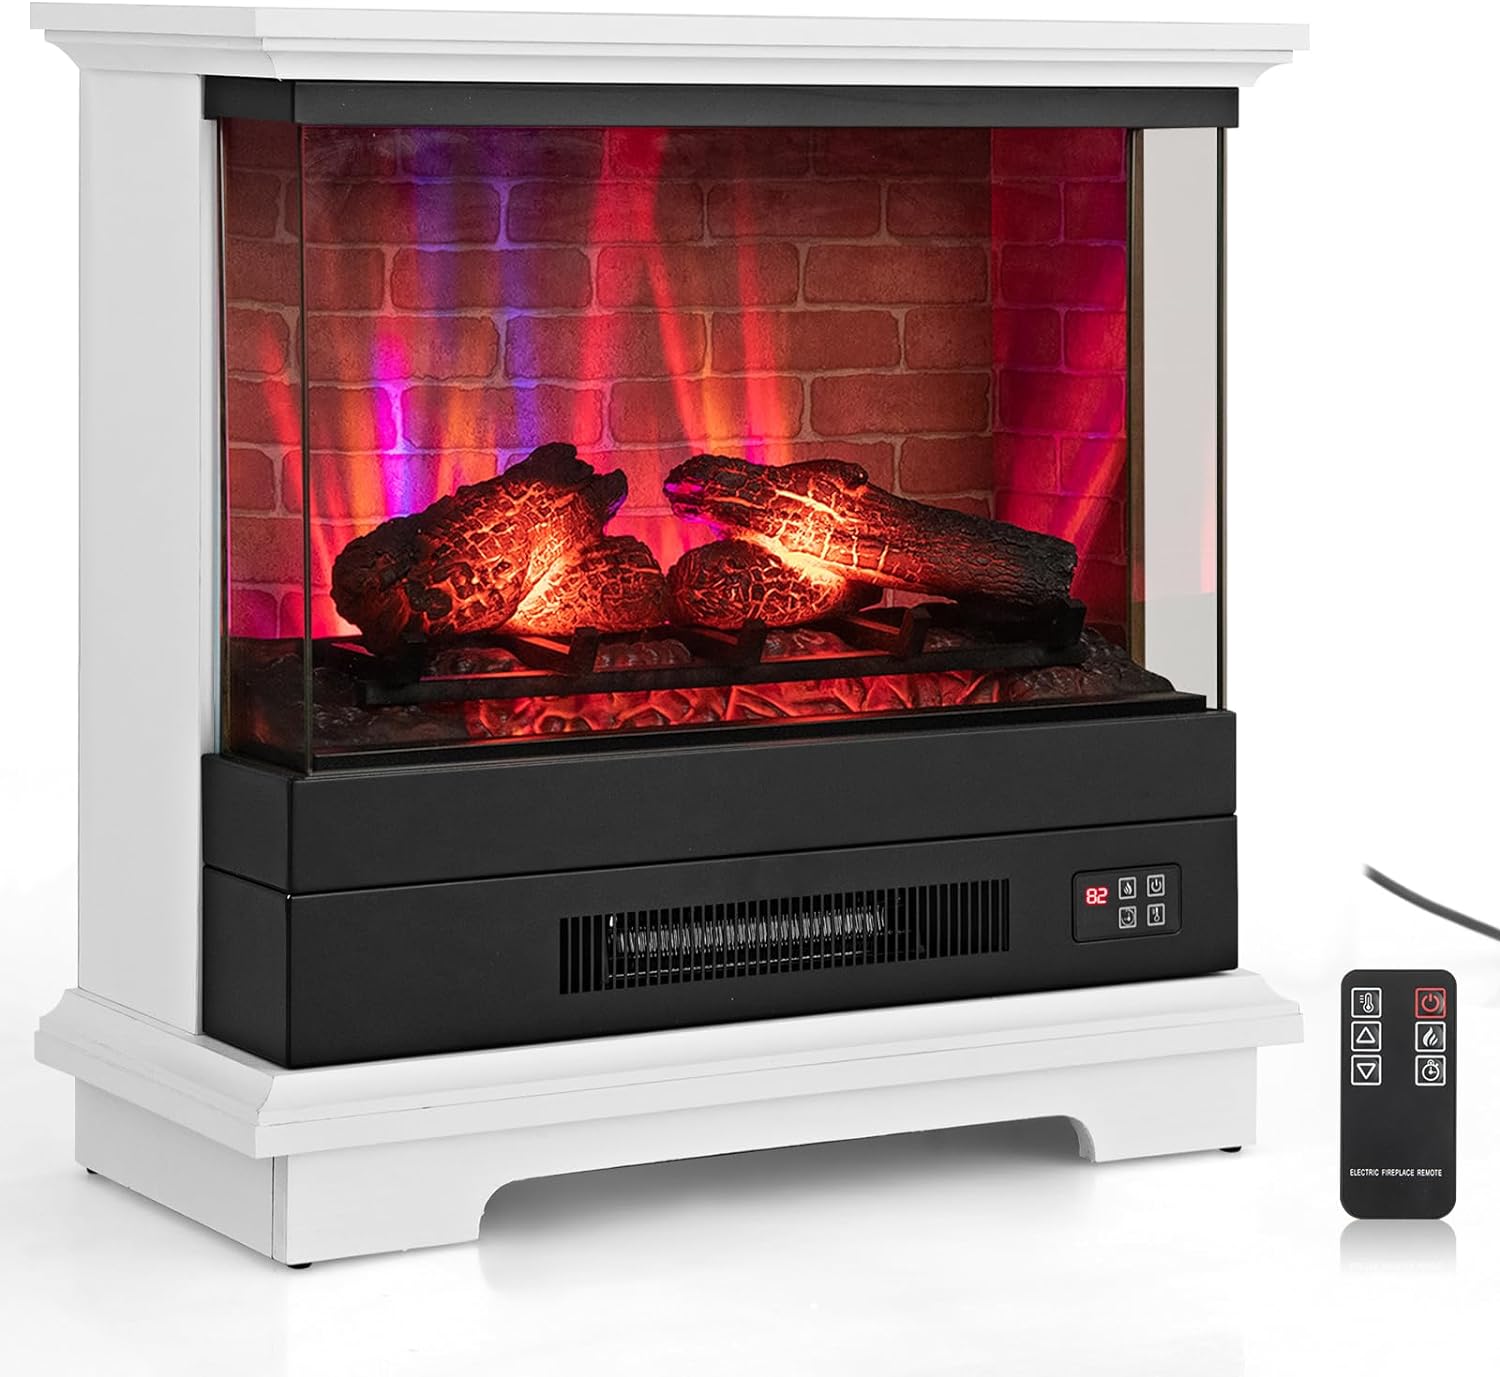 COSTWAY Electric Fireplace with 3-Sided Glass 27-inch Wide, 1400W Freestanding Fireplace Heater with Remote Control, 7-Level Vivid Flame, Thermostat, 0.5-6H Timer, Overheating Protection, White